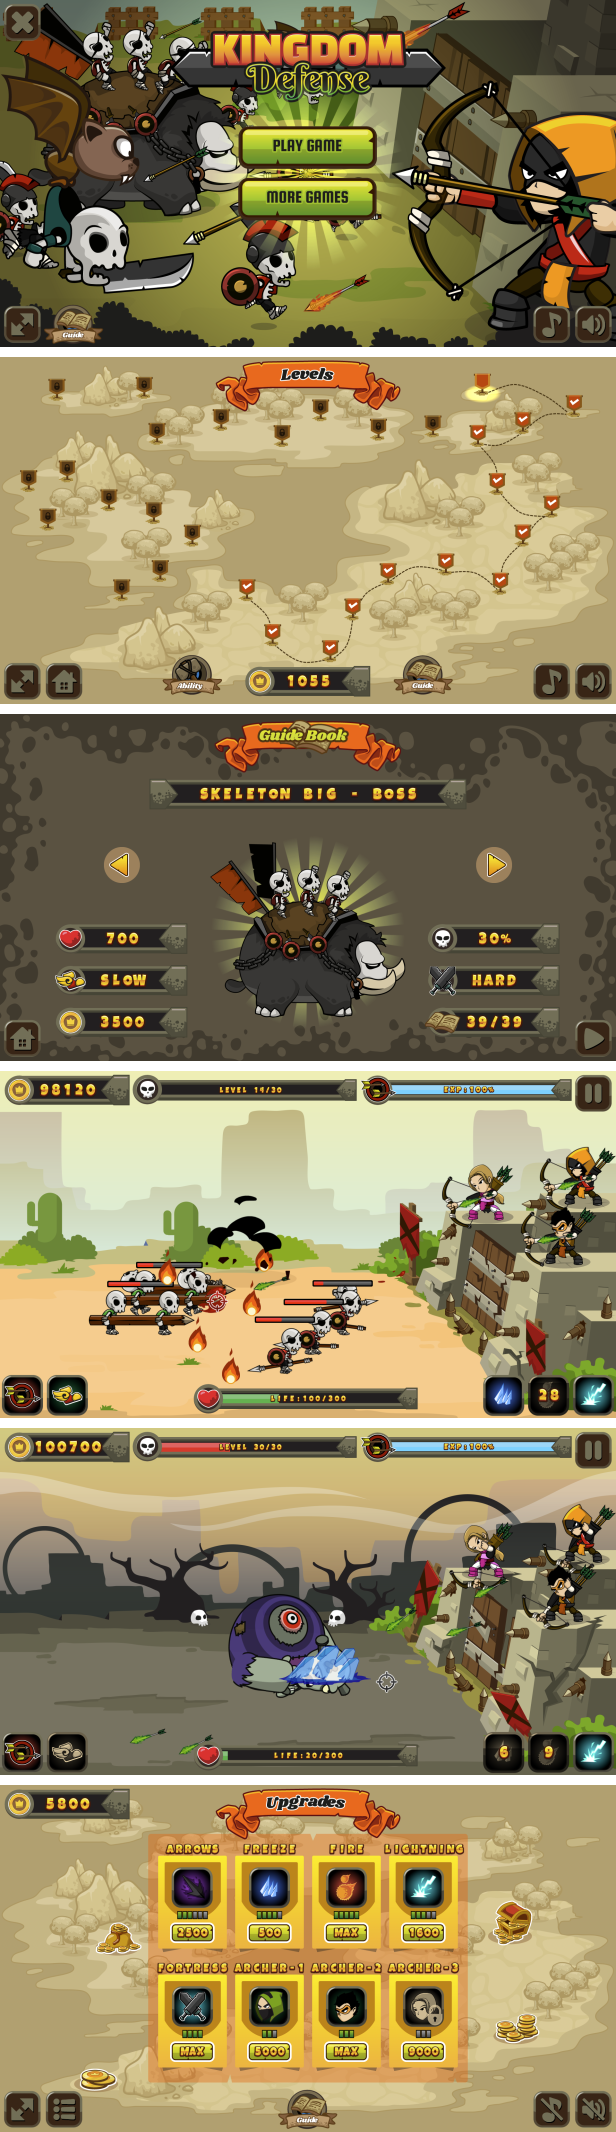 Kingdom Defense - HTML5 Game 30 Levels + Mobile Version! (Construct 3 | Construct 2 | Capx) - 3